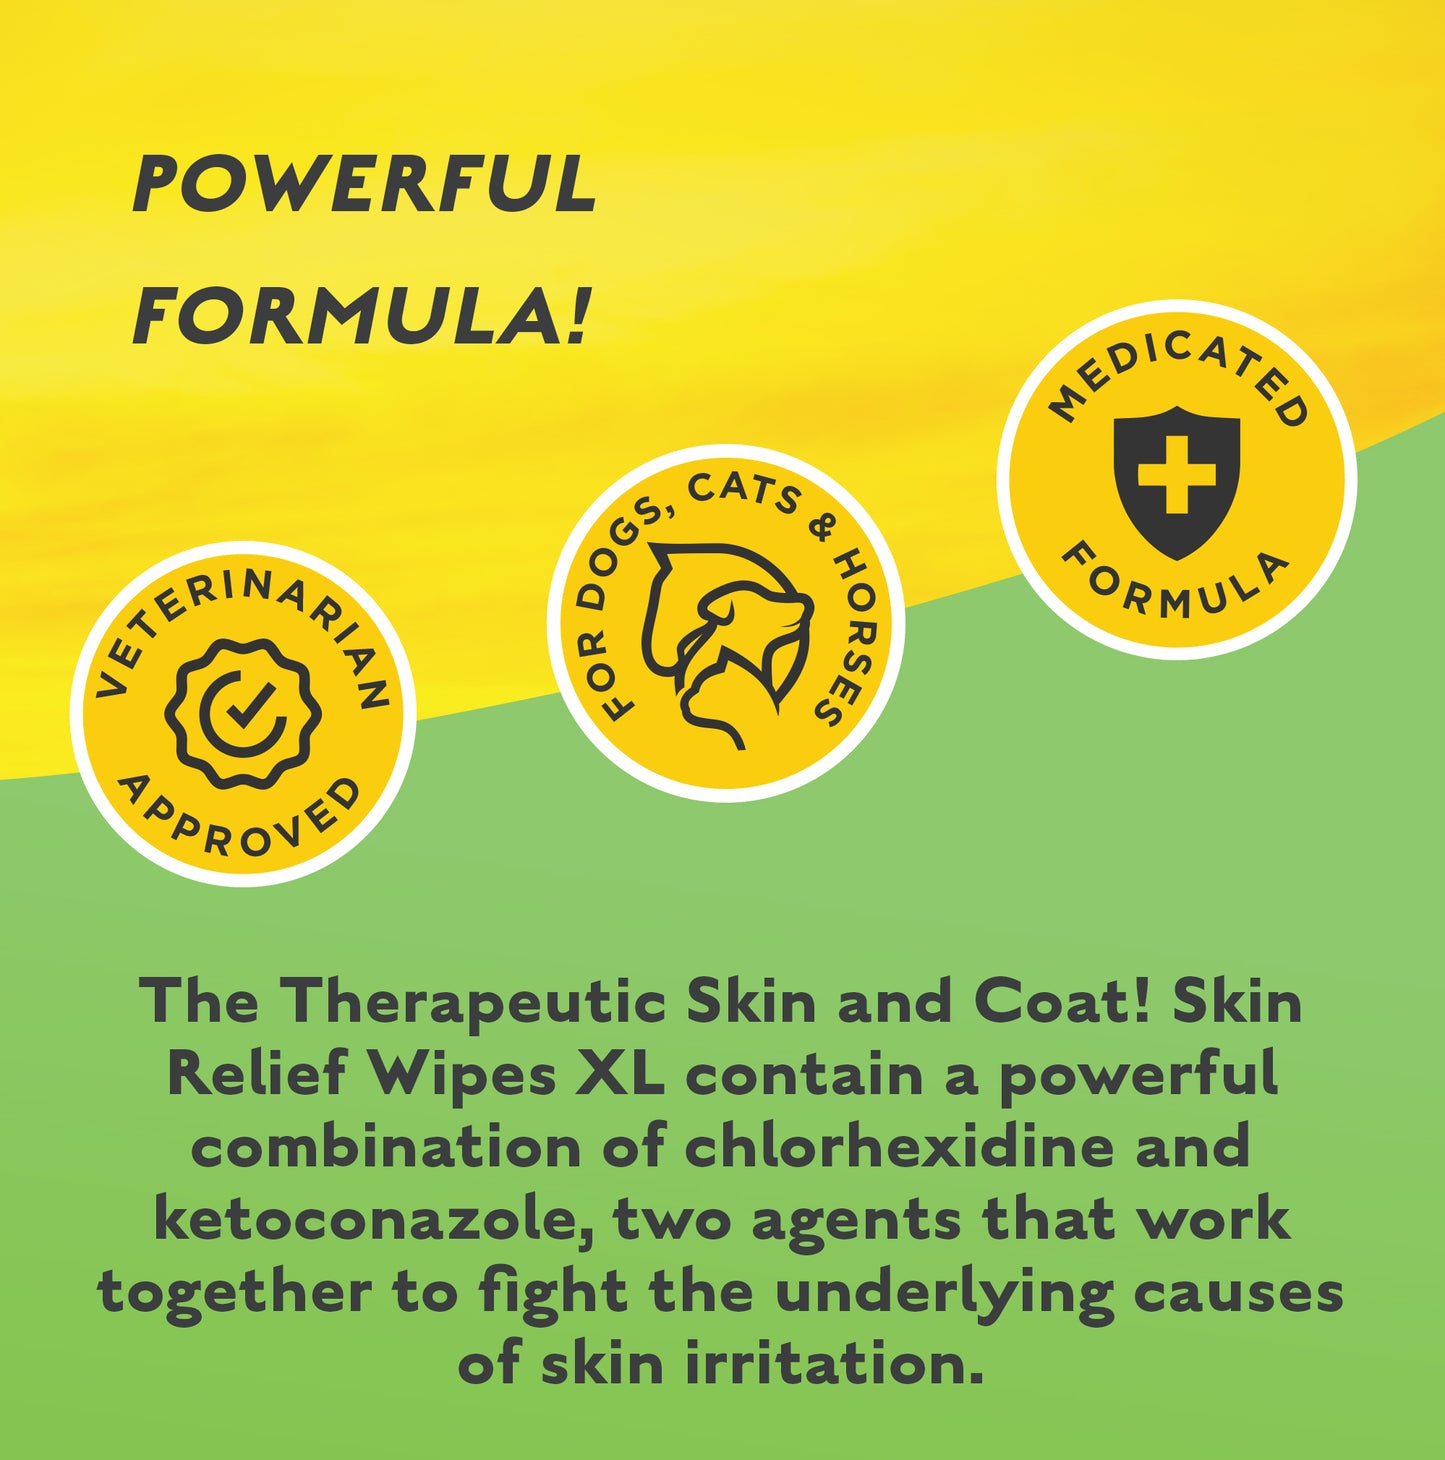 ALLERGY/SKIN/WIPE- Therapeutic Skin and Coat! Skin Relief Wipes XL